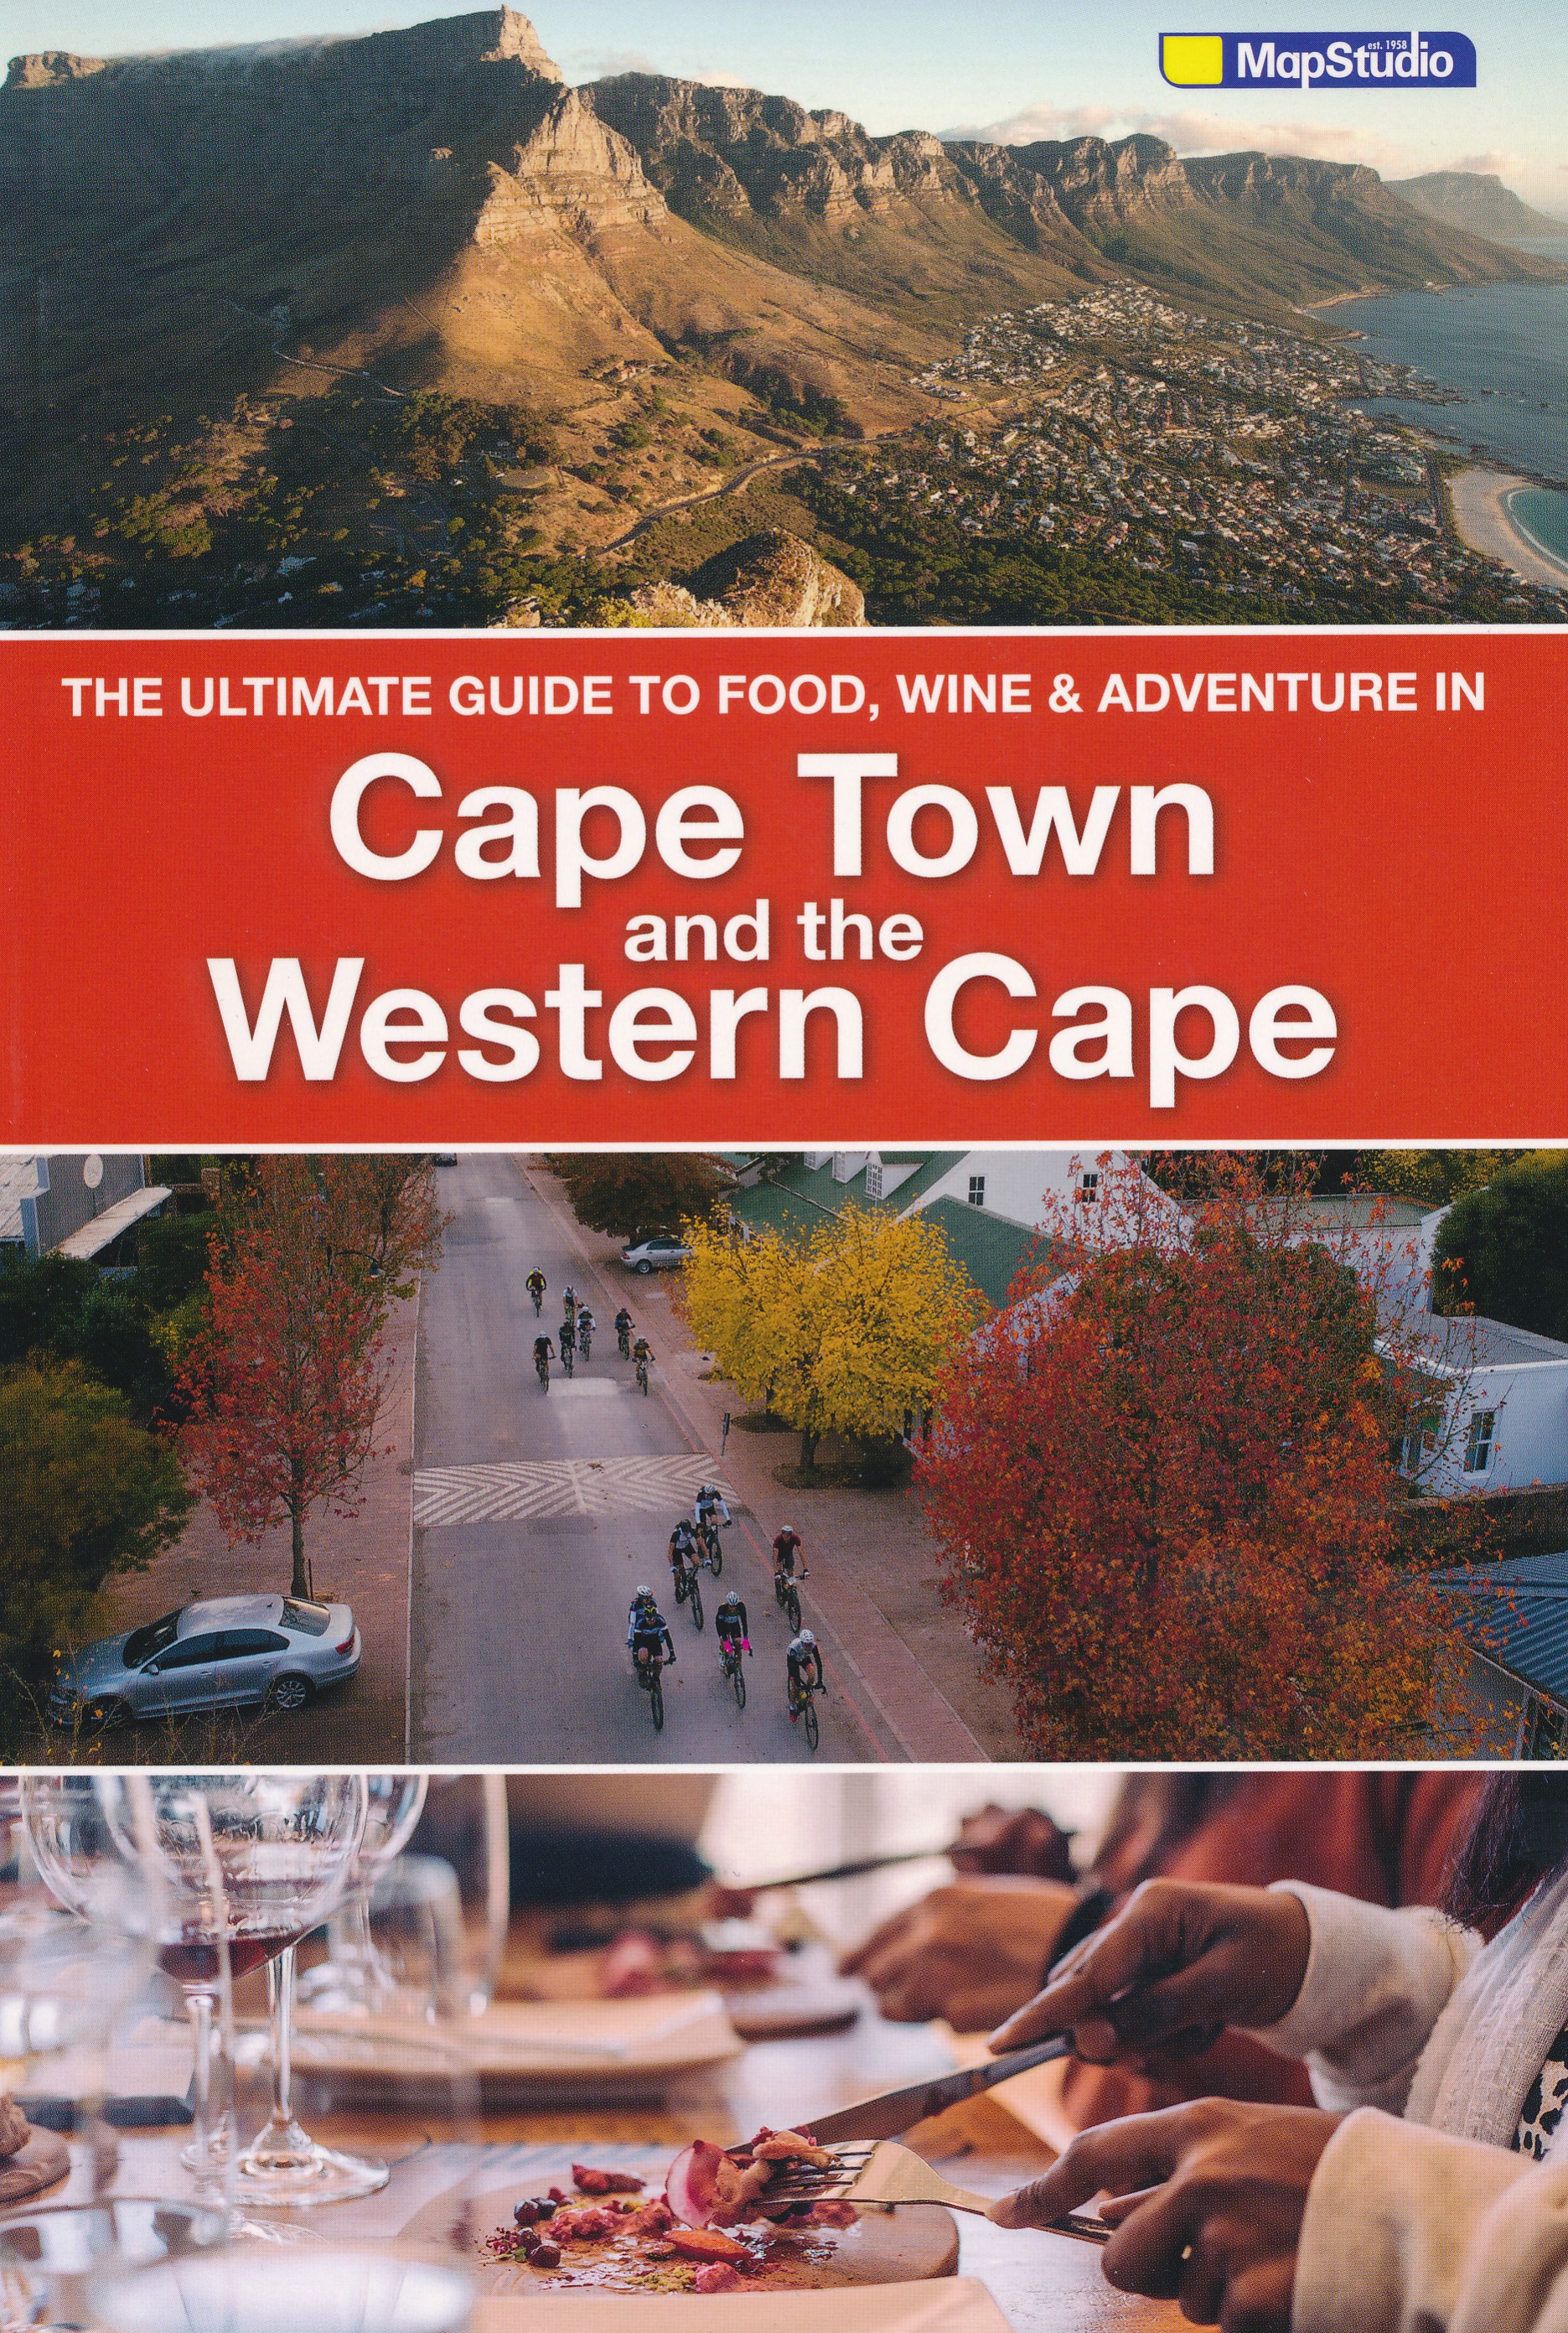 Online bestellen: Reisgids Ultimate Guide to food, wine & adventure - Cape Town and the Western Cape | MapStudio